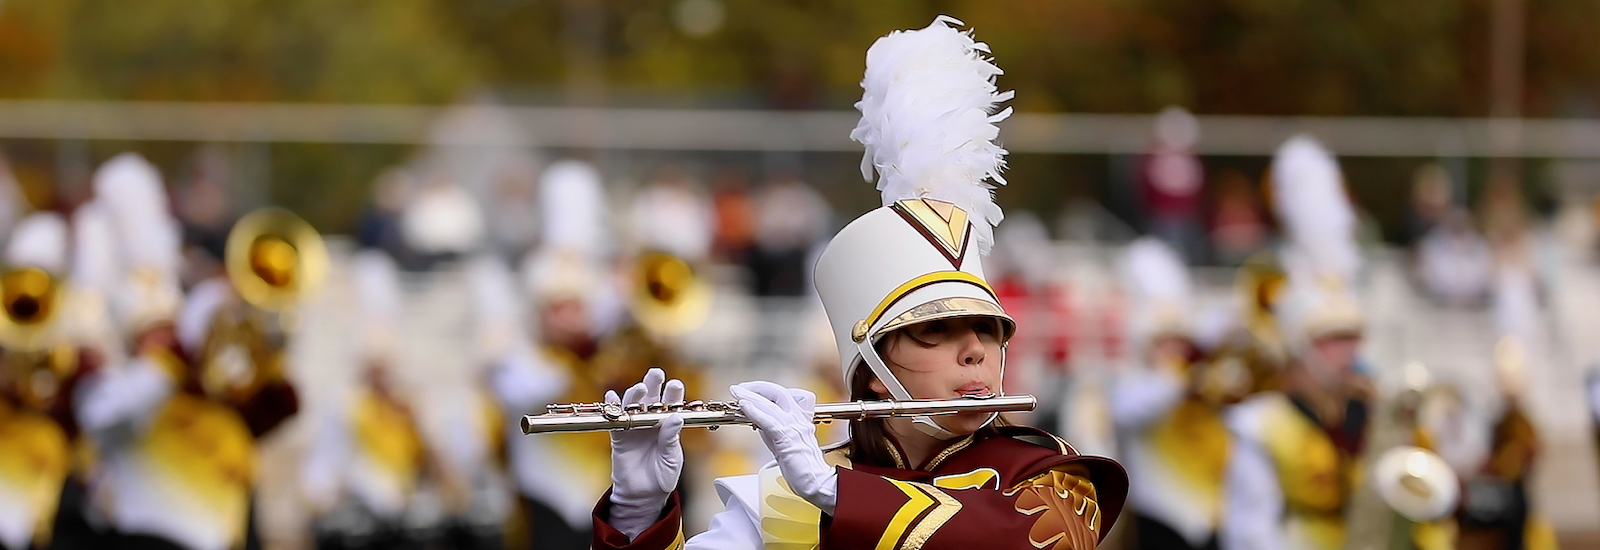 A close up of marching band members in uniform playing instruments duirng a game.